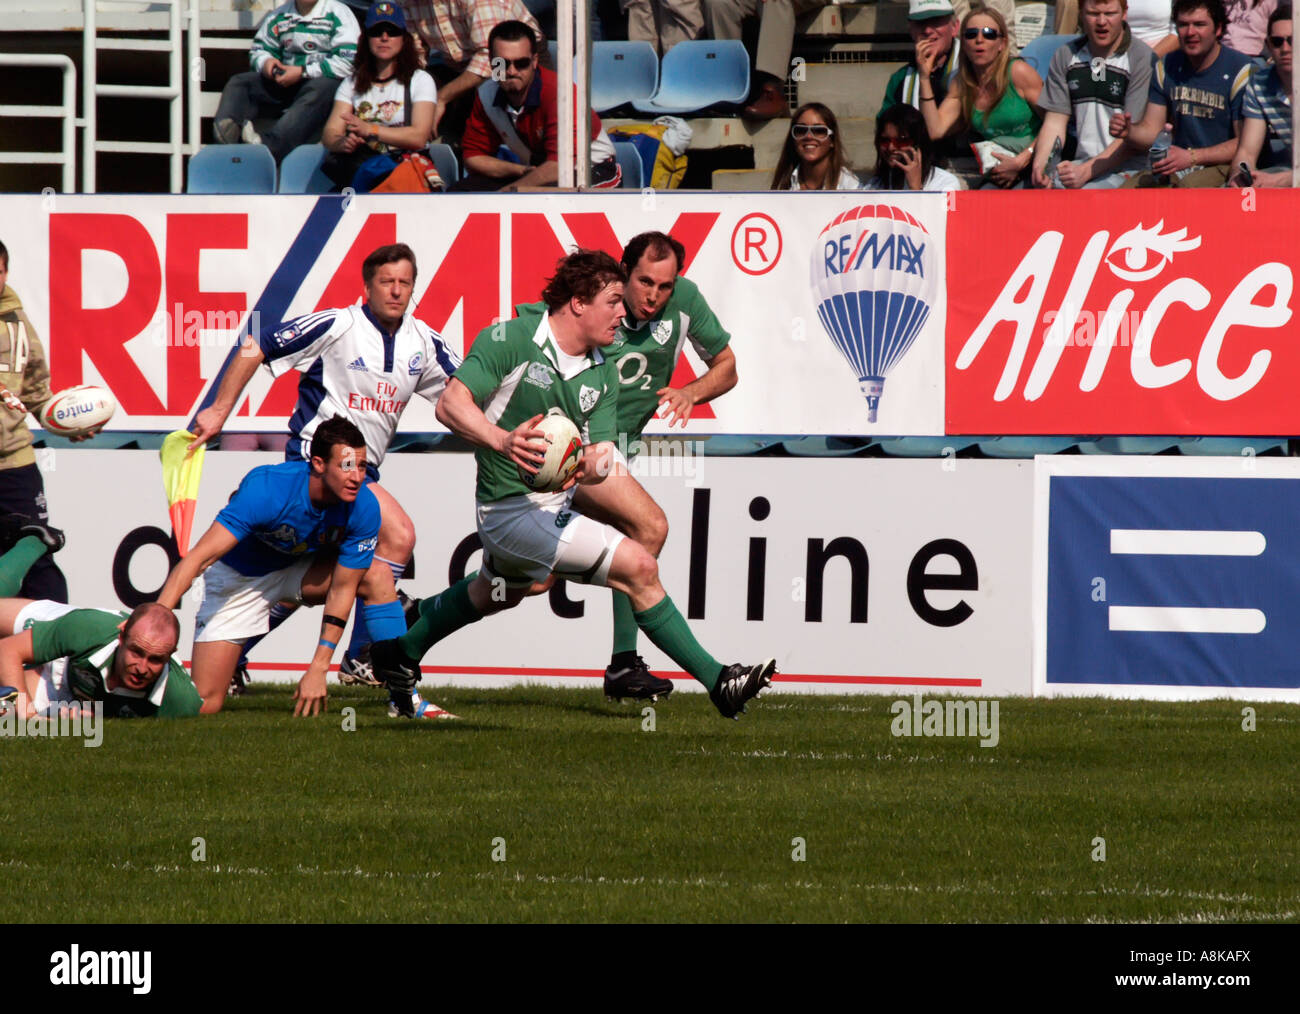 Brian O Driscoll about to pass ball to Girvan Dempsey who goes on to score Italy v Ireland six nations rugby March 10th 2007 Stock Photo